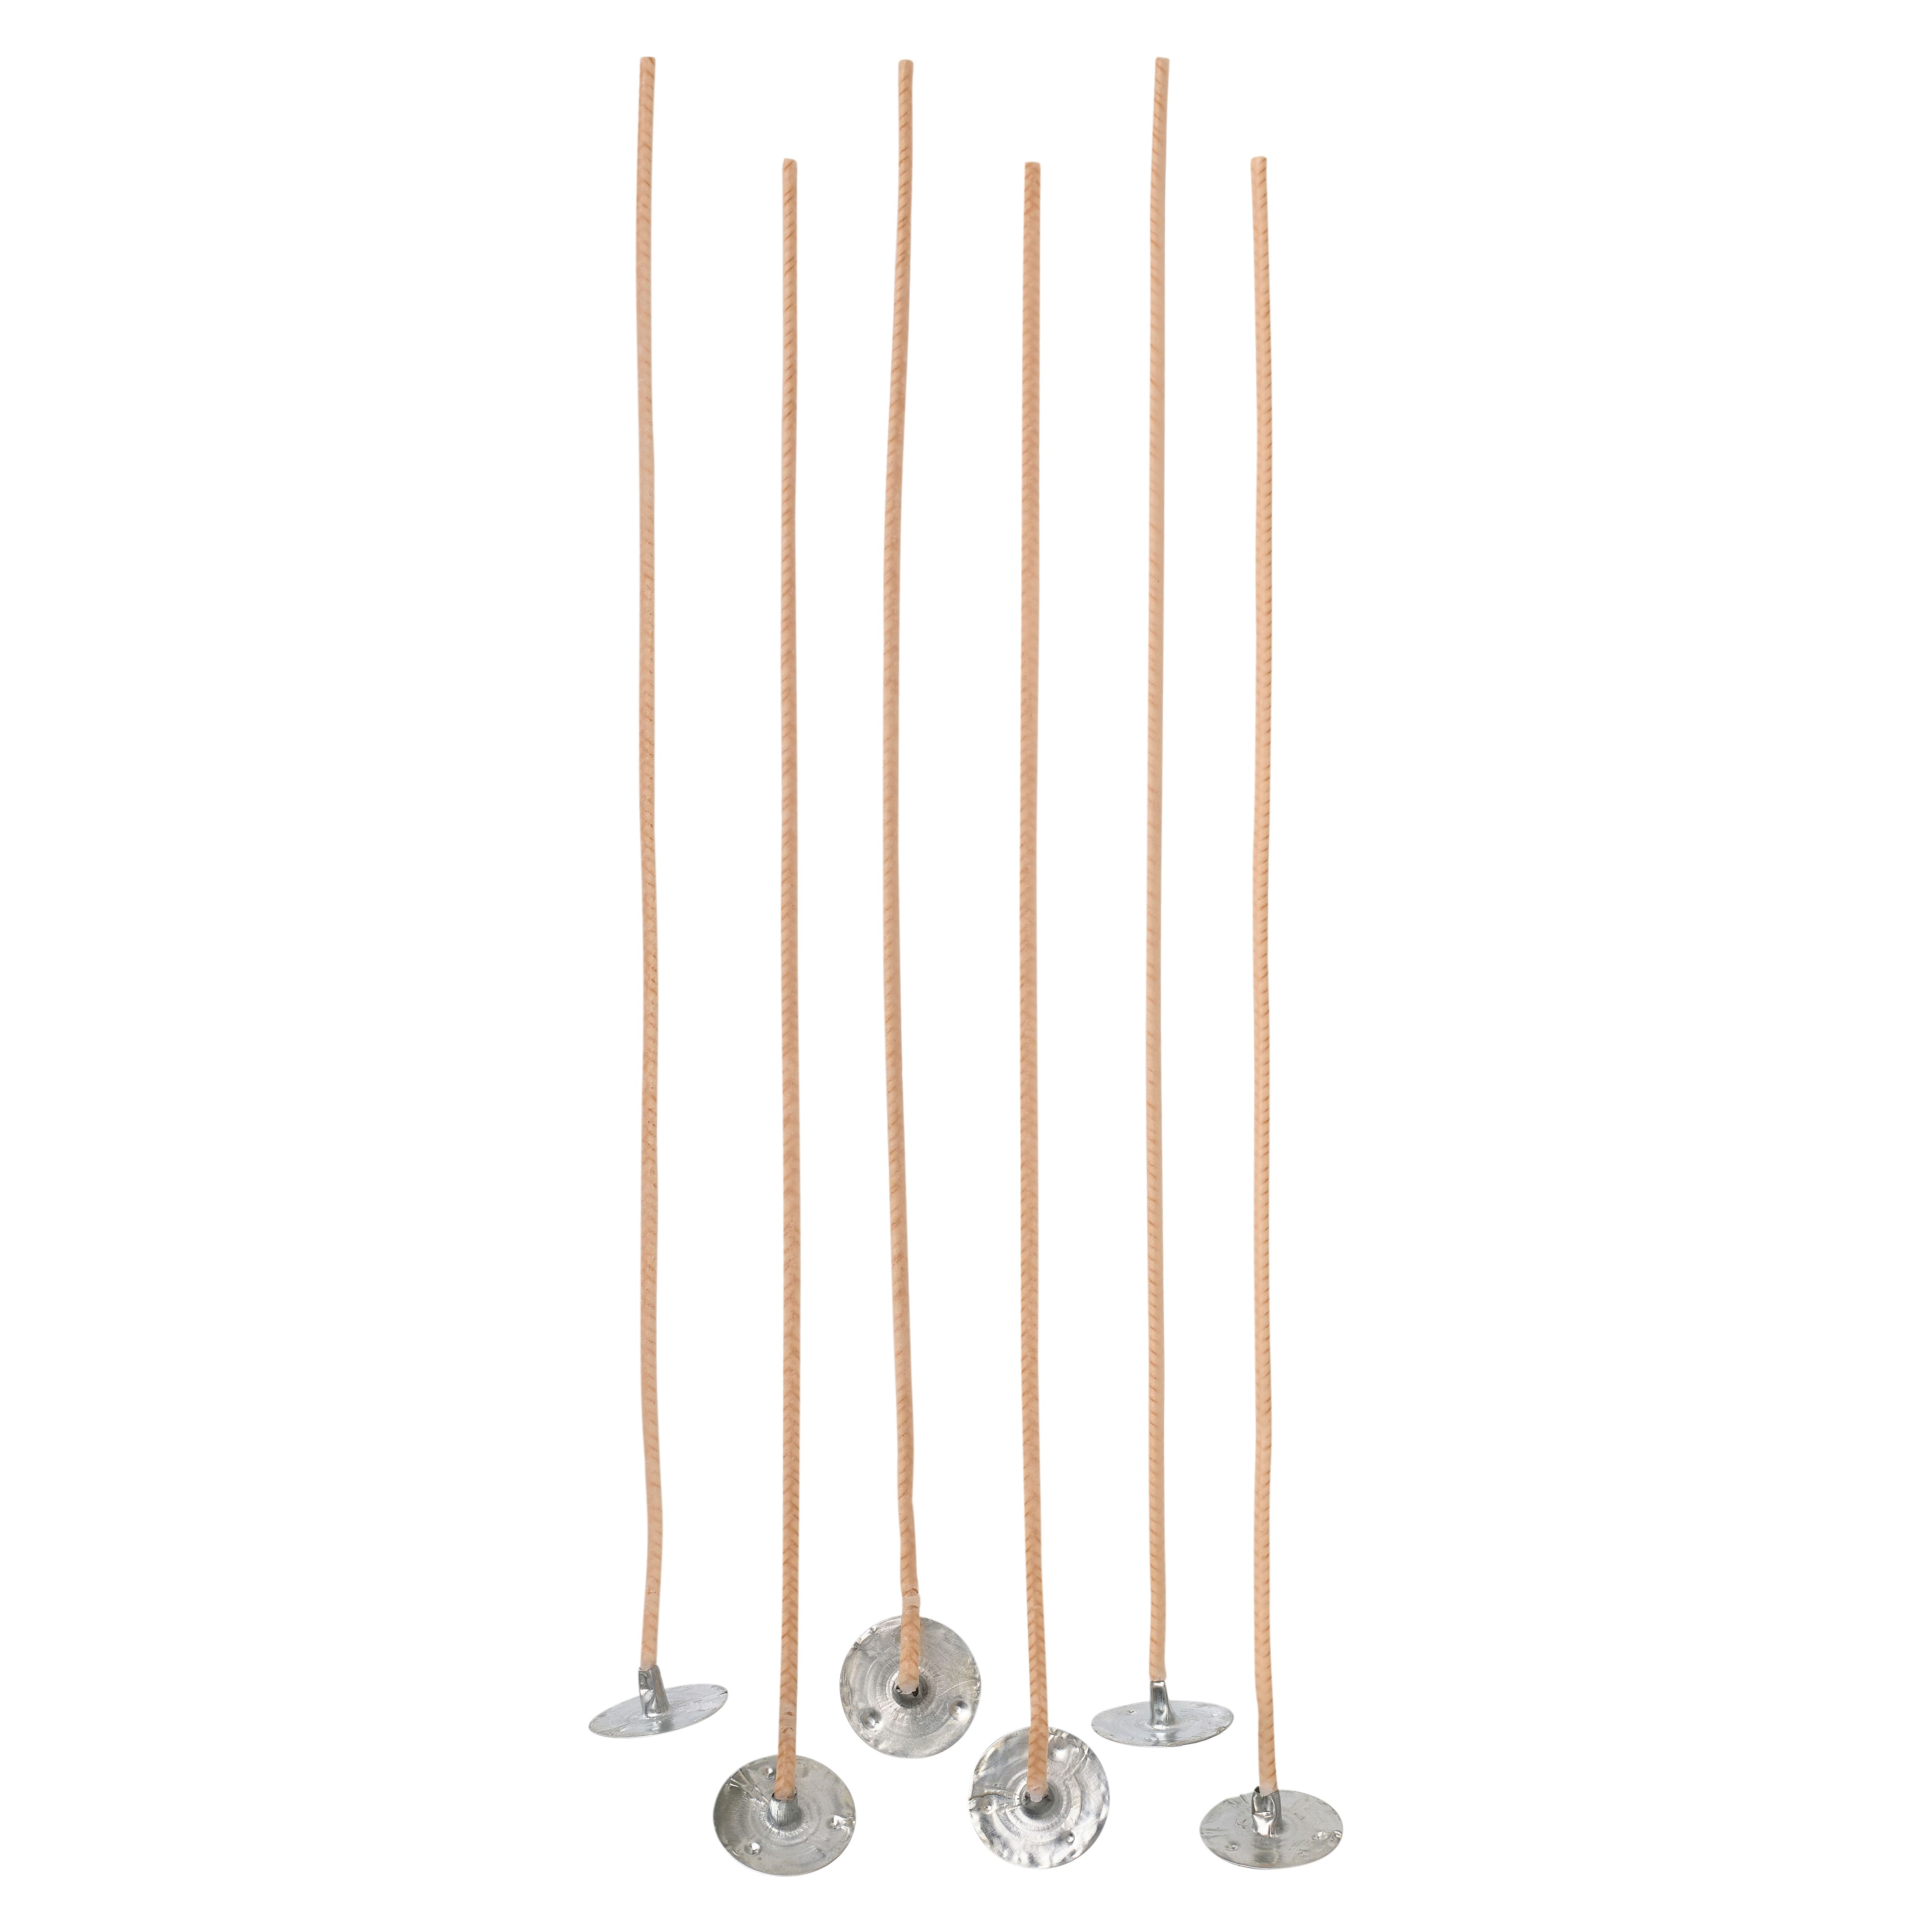 CANDLE WICKS Pre Tabbed 6-inch ZINC CORE Lots of 10 to 200 Candle Making